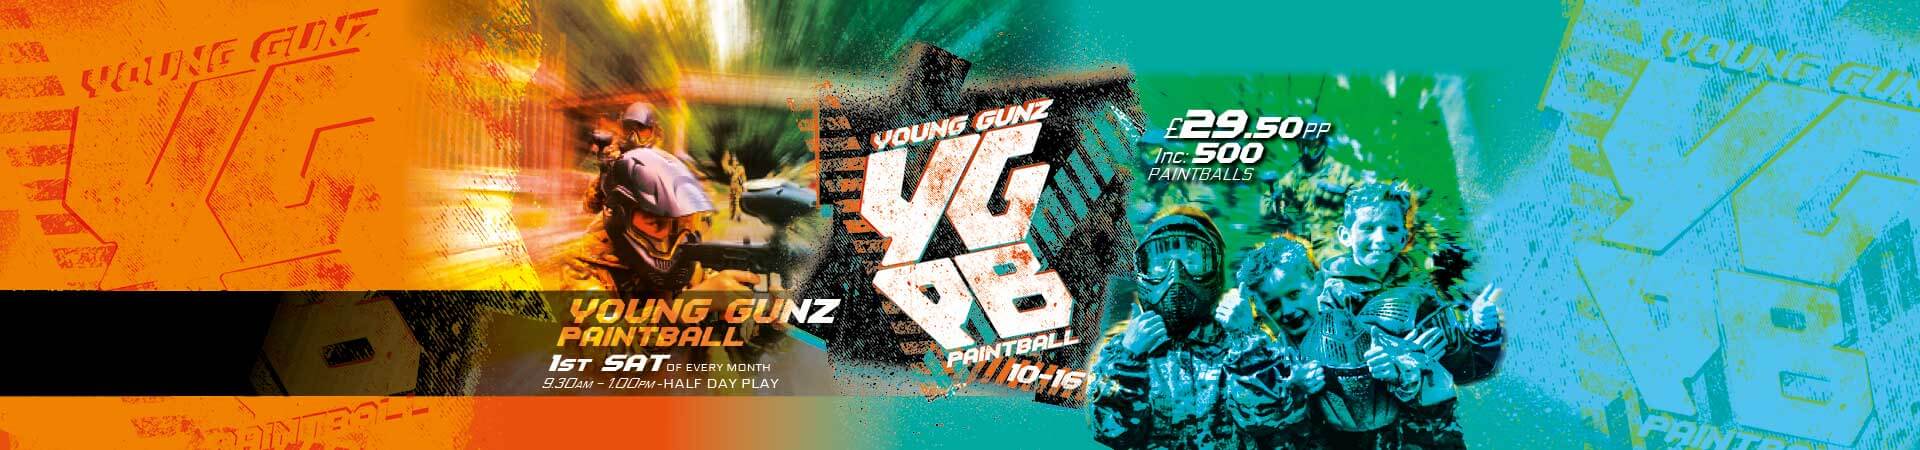 young gunz paintball